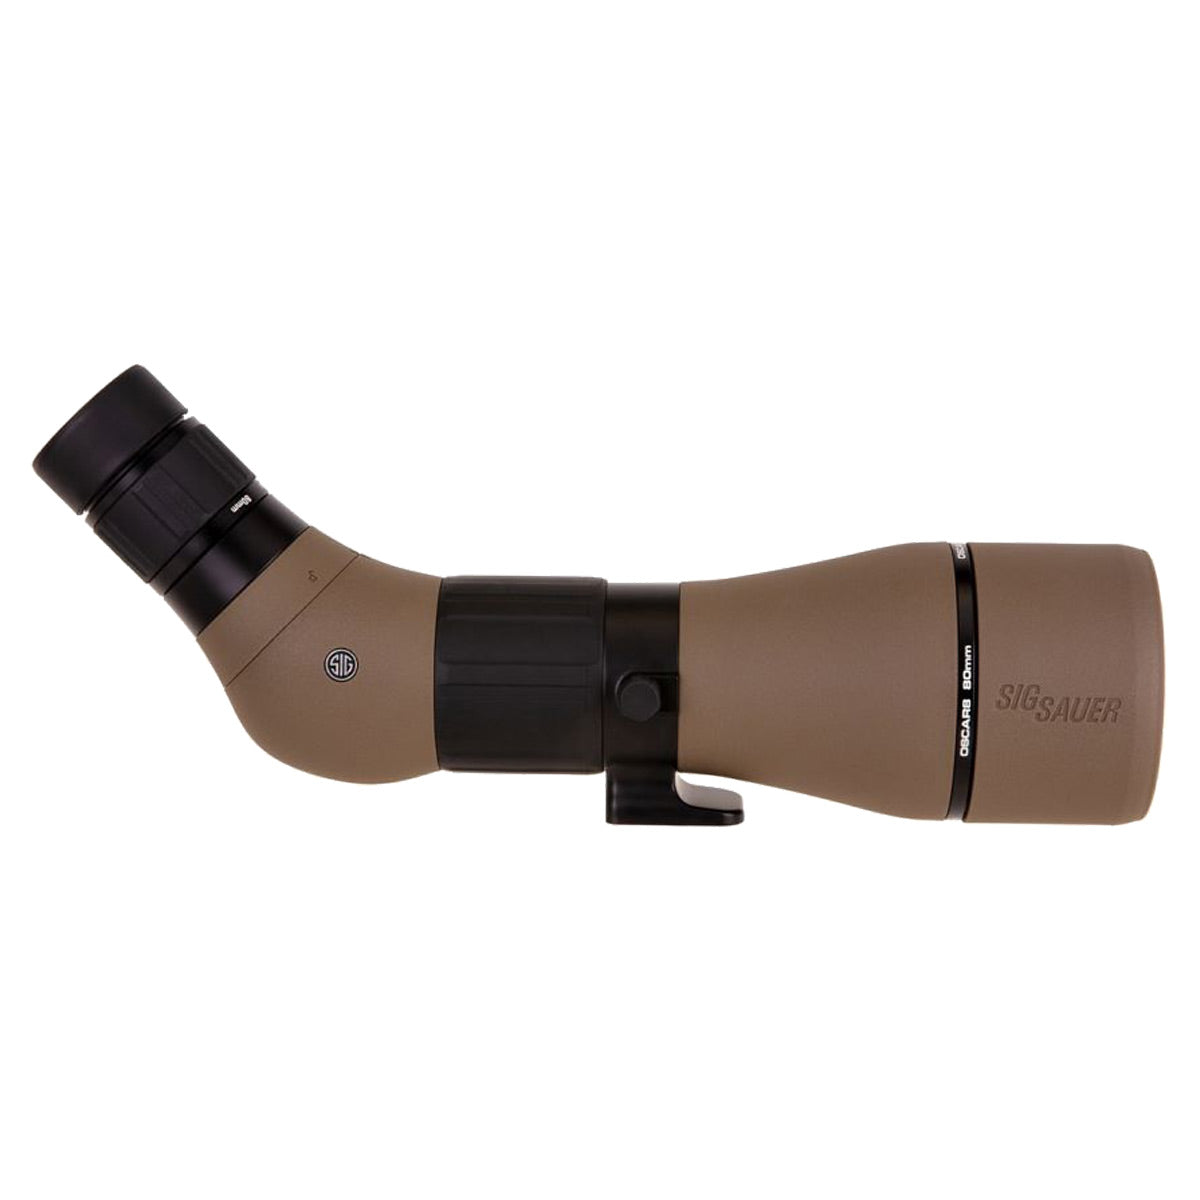 Sig Sauer OSCAR8 27-55x80mm Angled Spotting Scope in  by GOHUNT | Sig Sauer - GOHUNT Shop